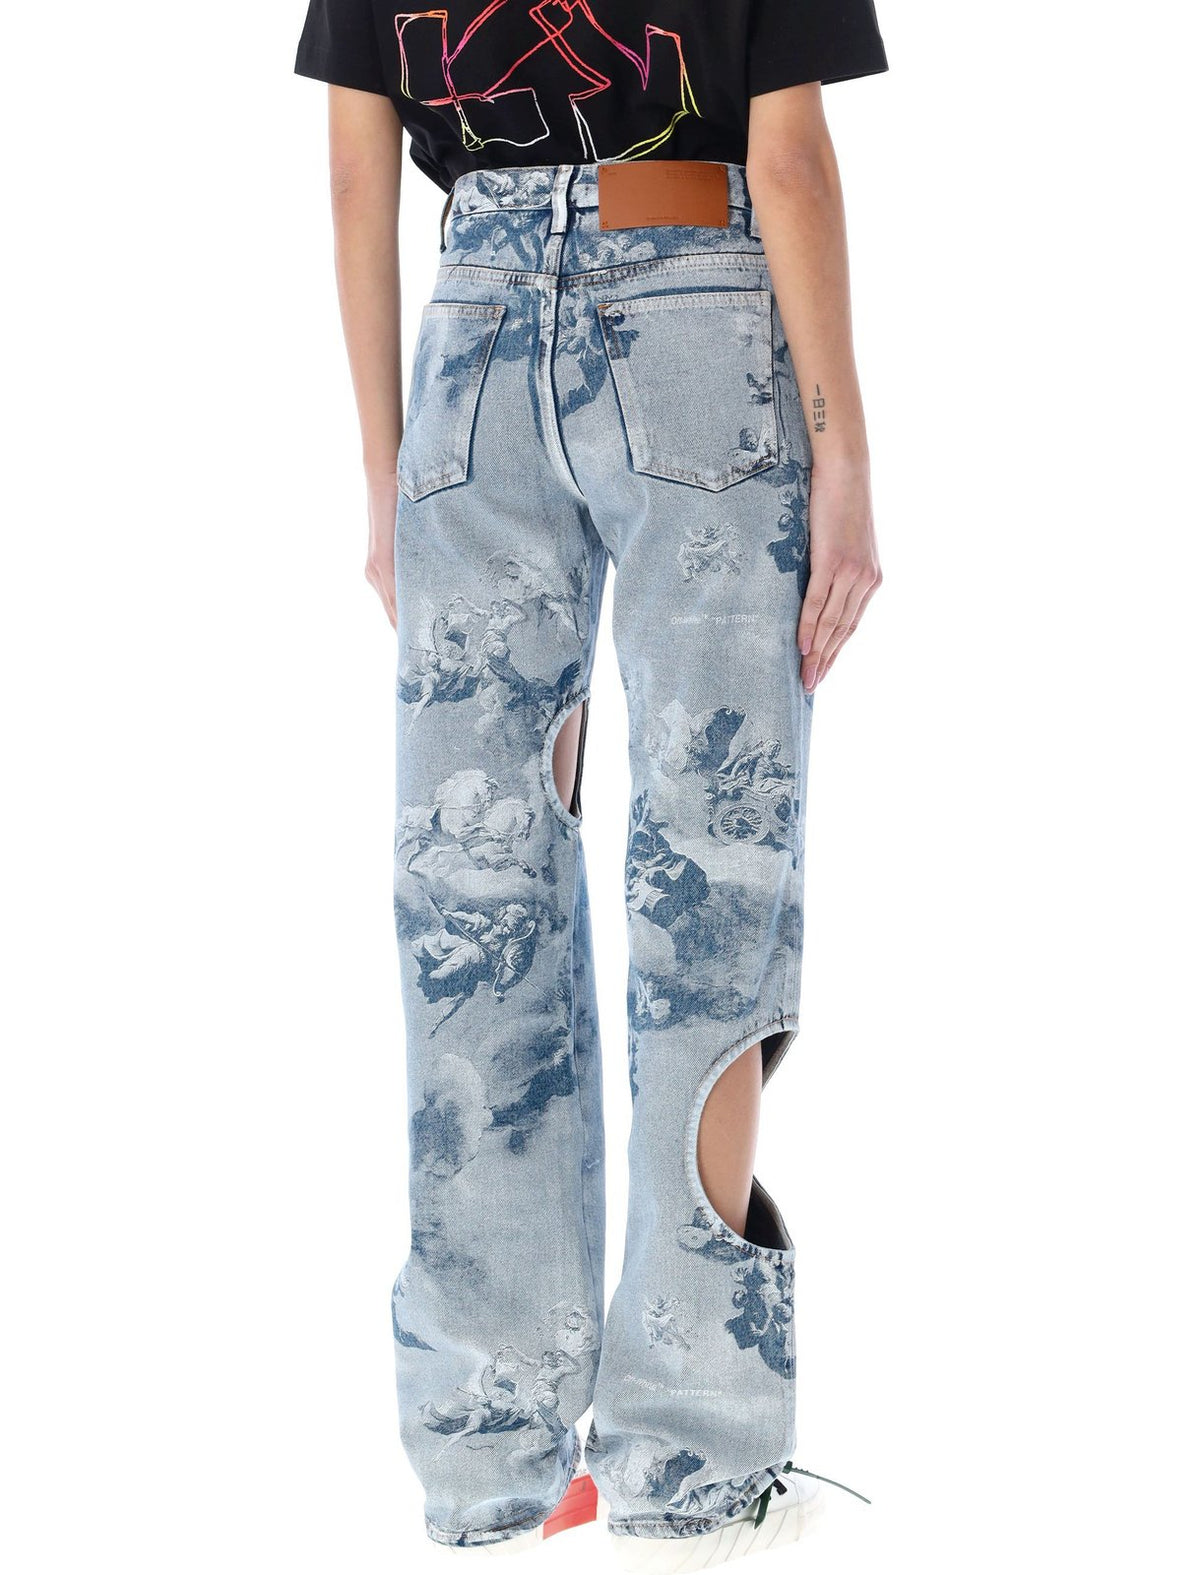 Off-White Cut-Out High Waist Jeans